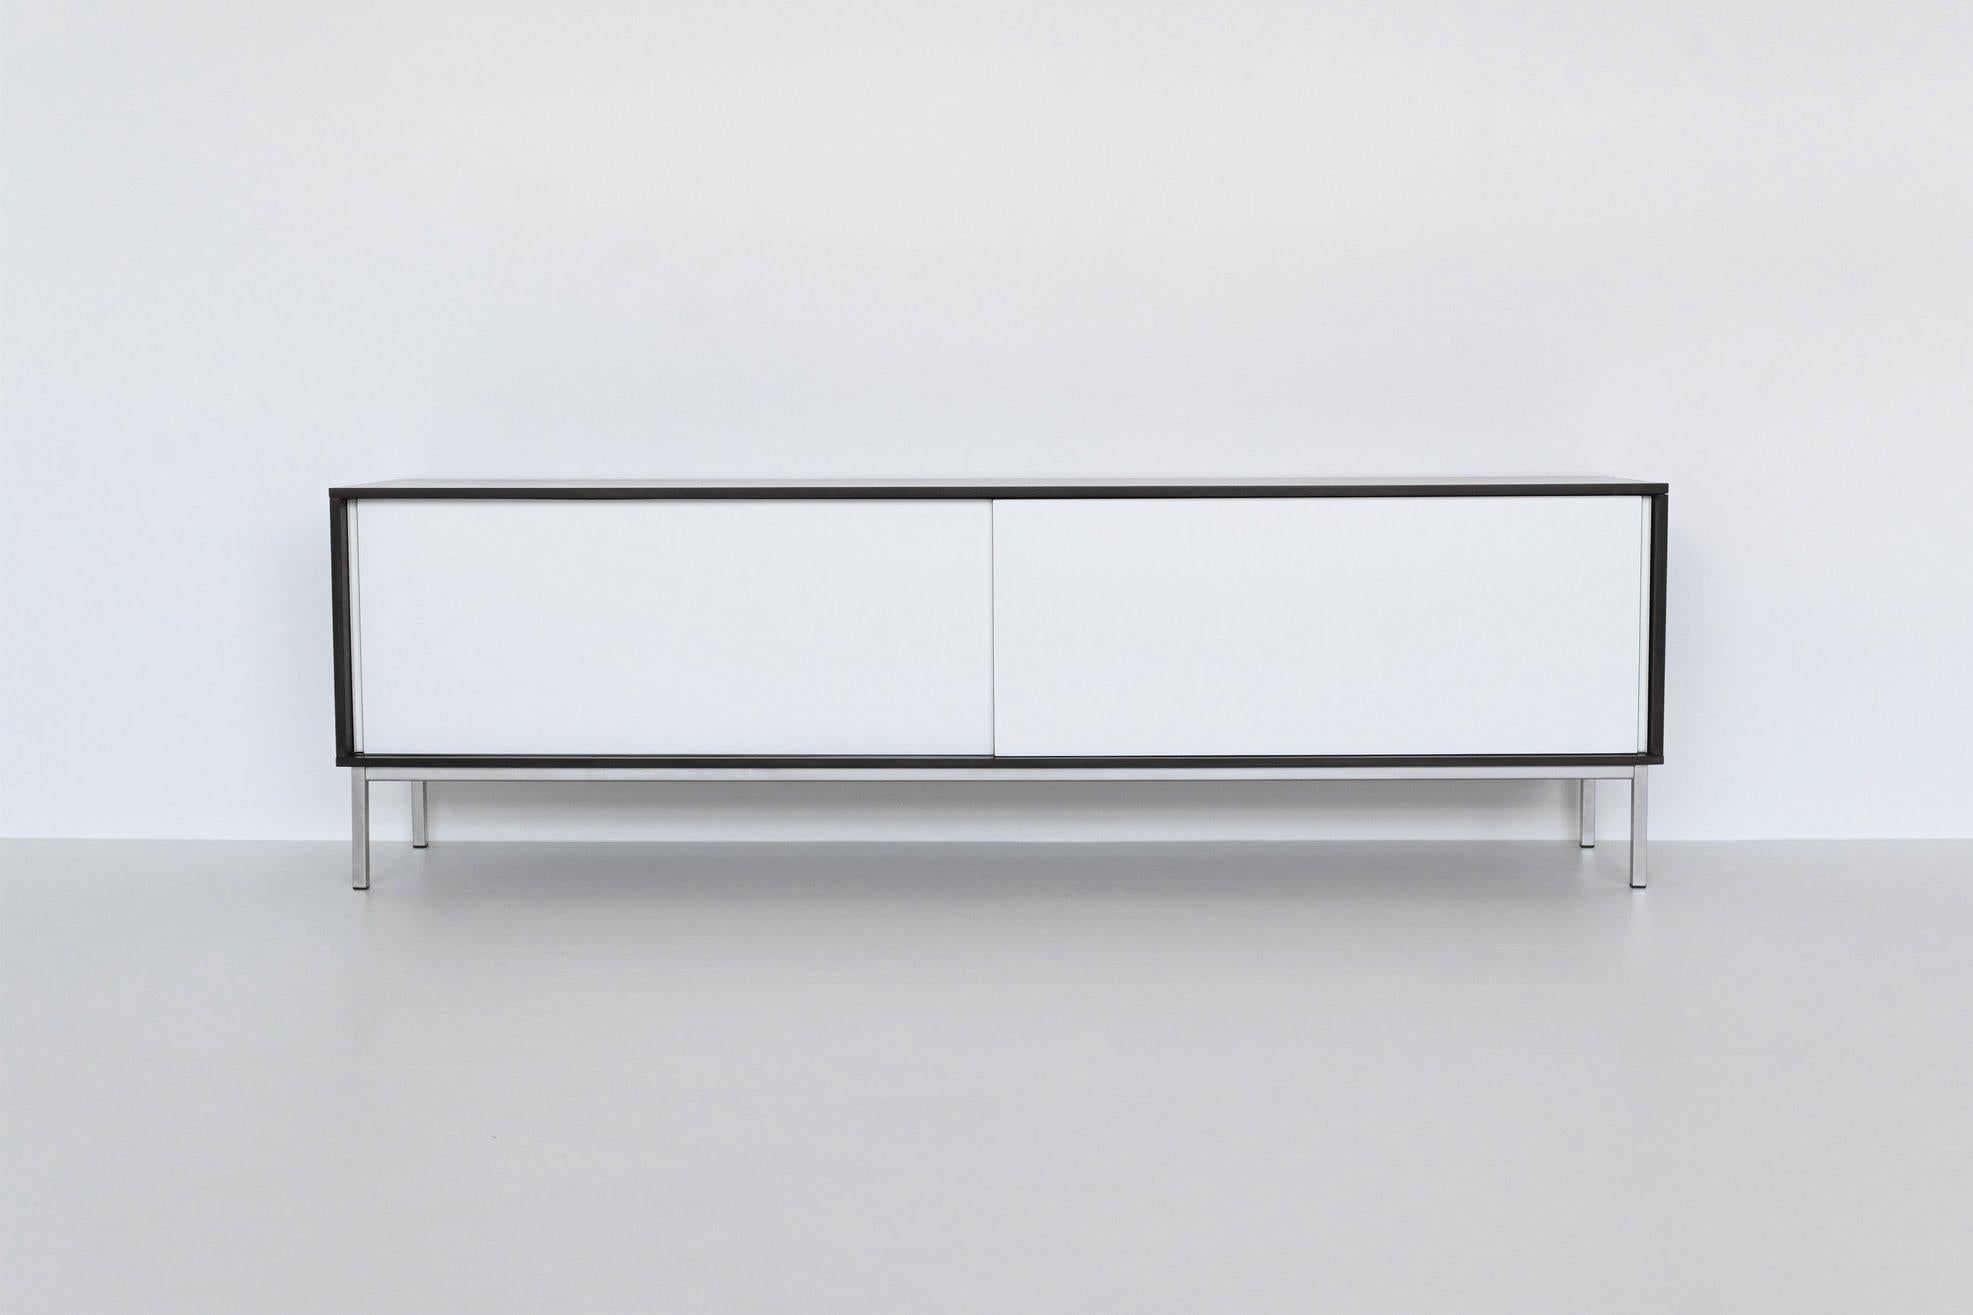 Beautiful minimalistic and modernist sideboard model KW85 designed by Martin Visser and manufactured by ‘t Spectrum Bergeijk, The Netherlands 1965. This longest version has a wenge wooden cabinet with two white laminated sliding doors supported by